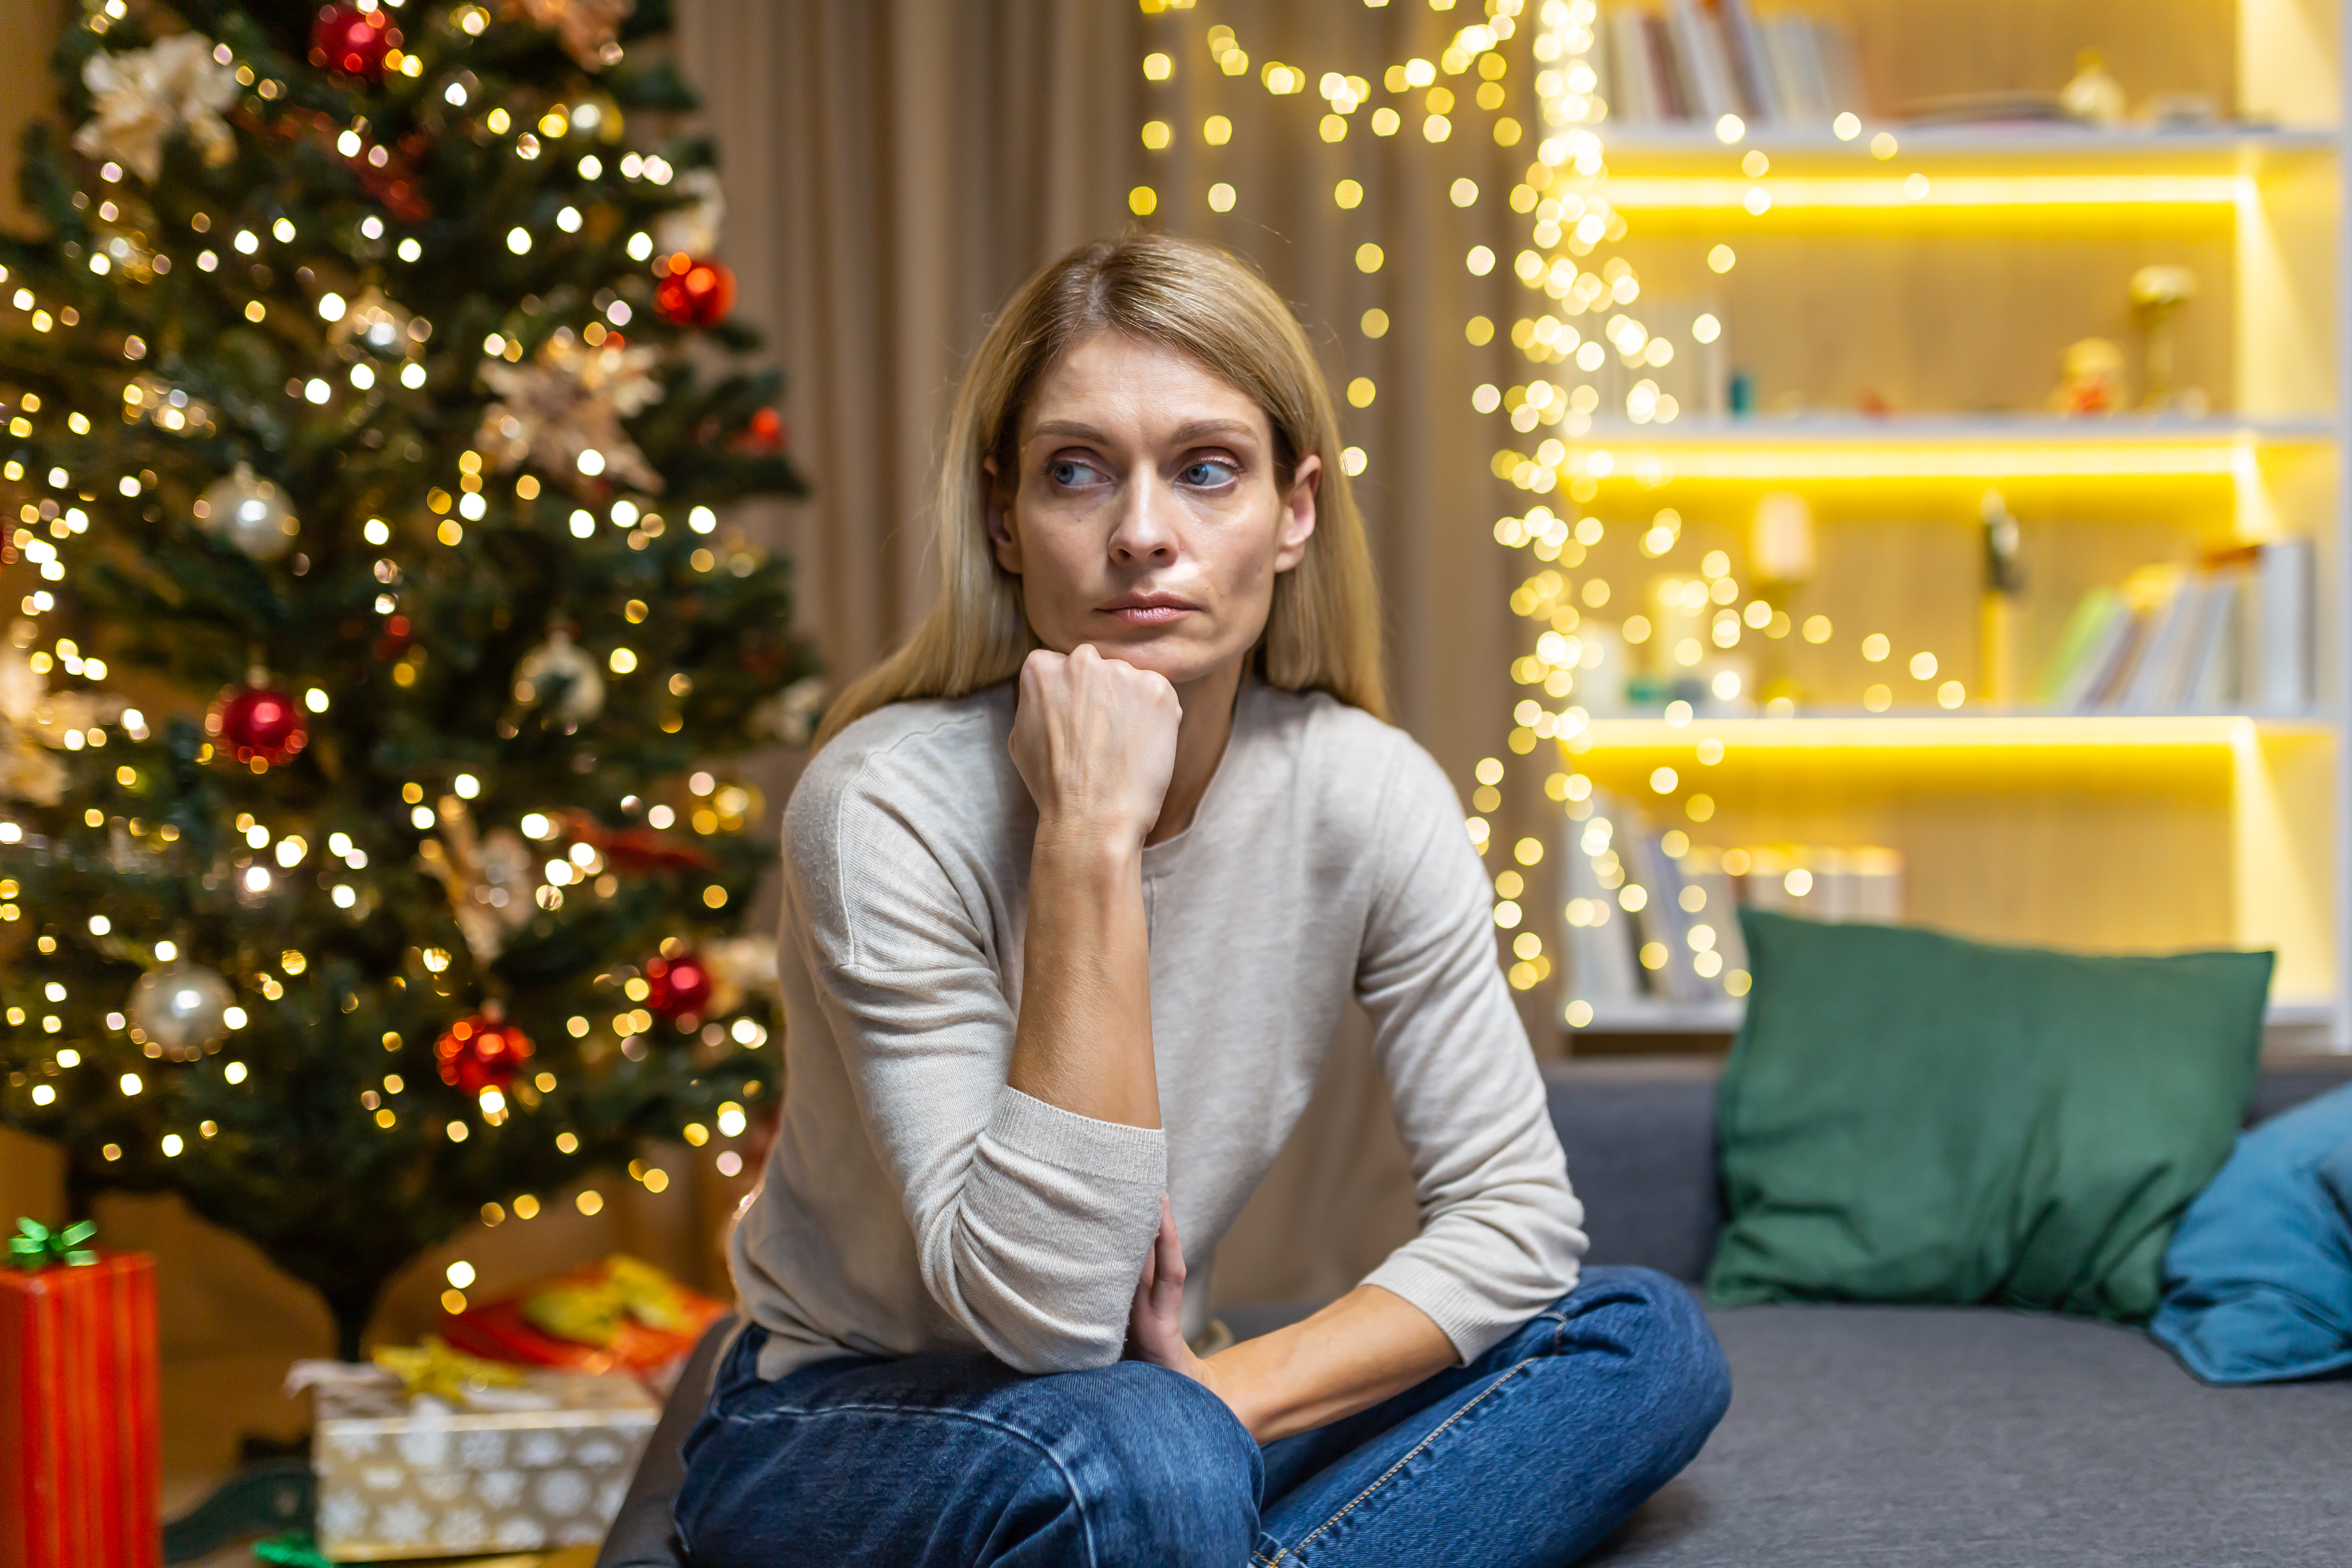 A sad woman sitting in front of a Christmas tree | Source: Getty Images